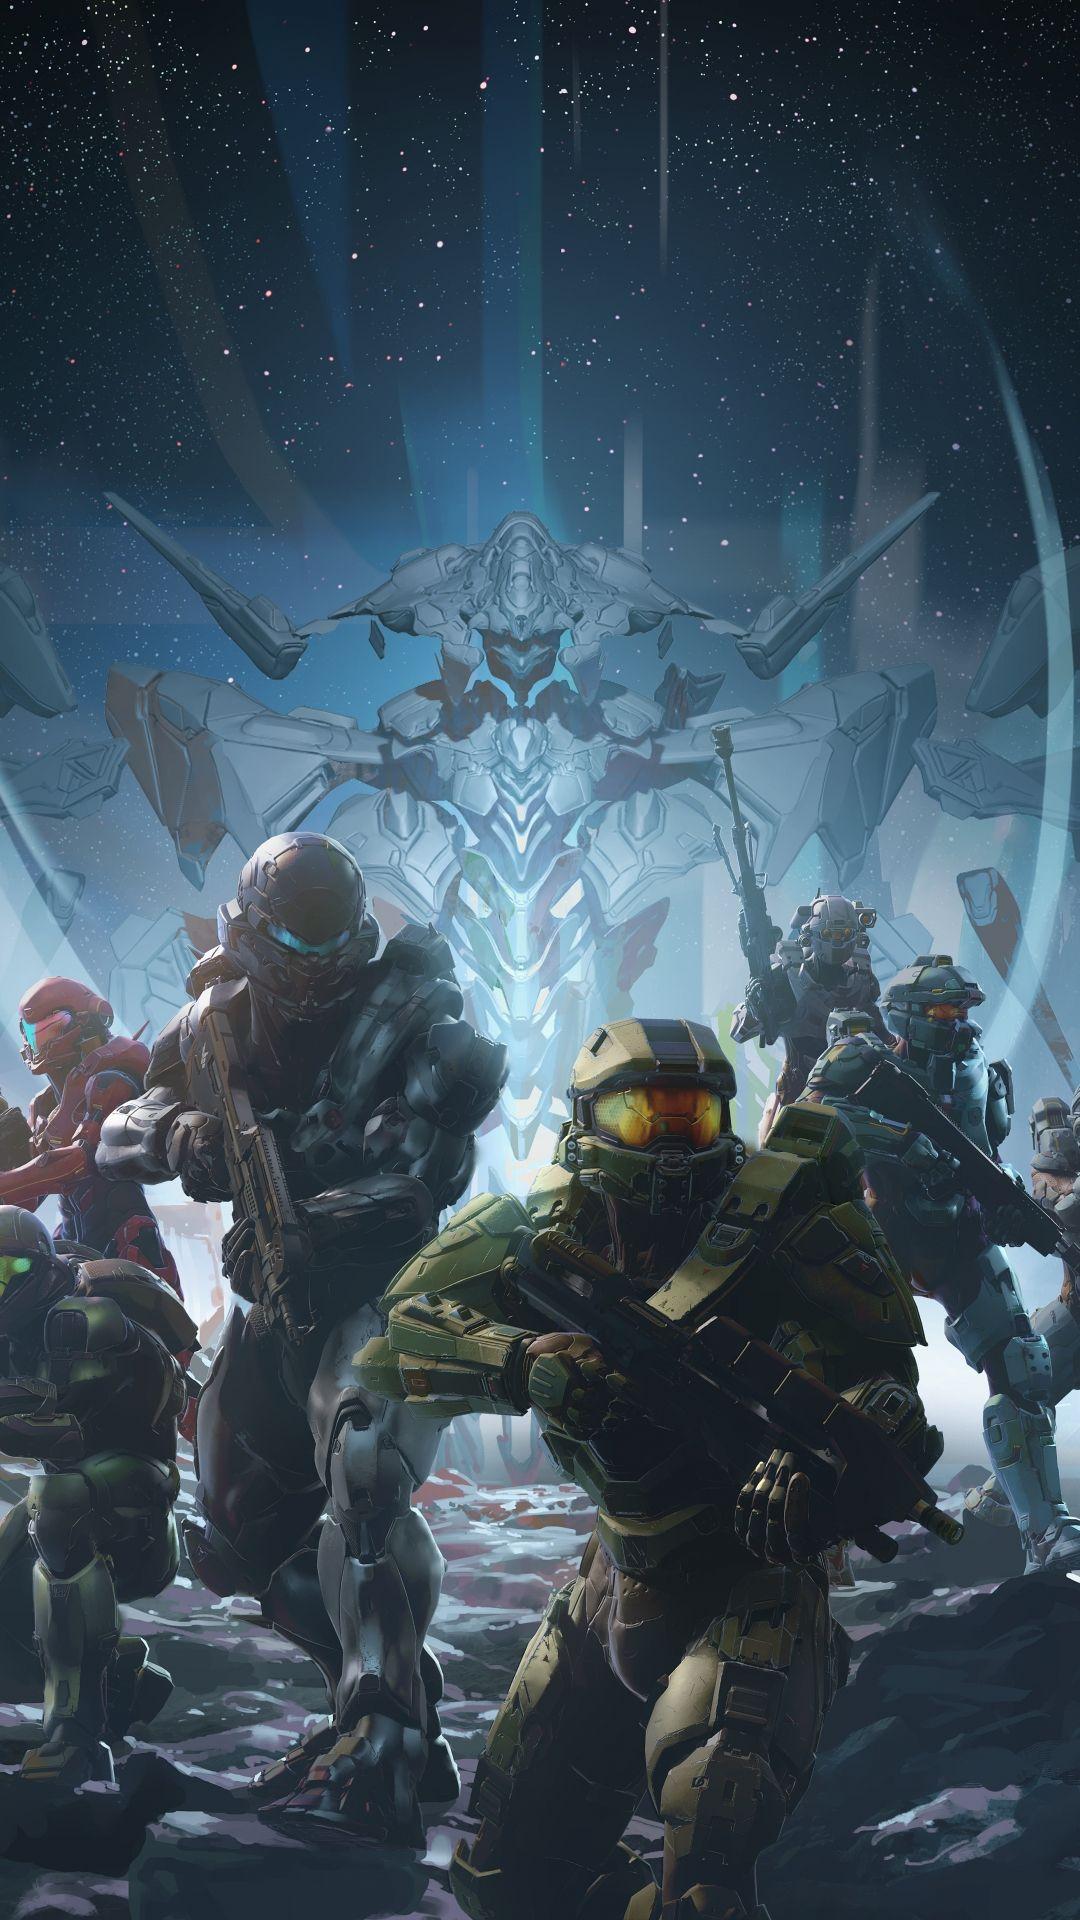 IPhone 6 Game Halo 5: Guardians